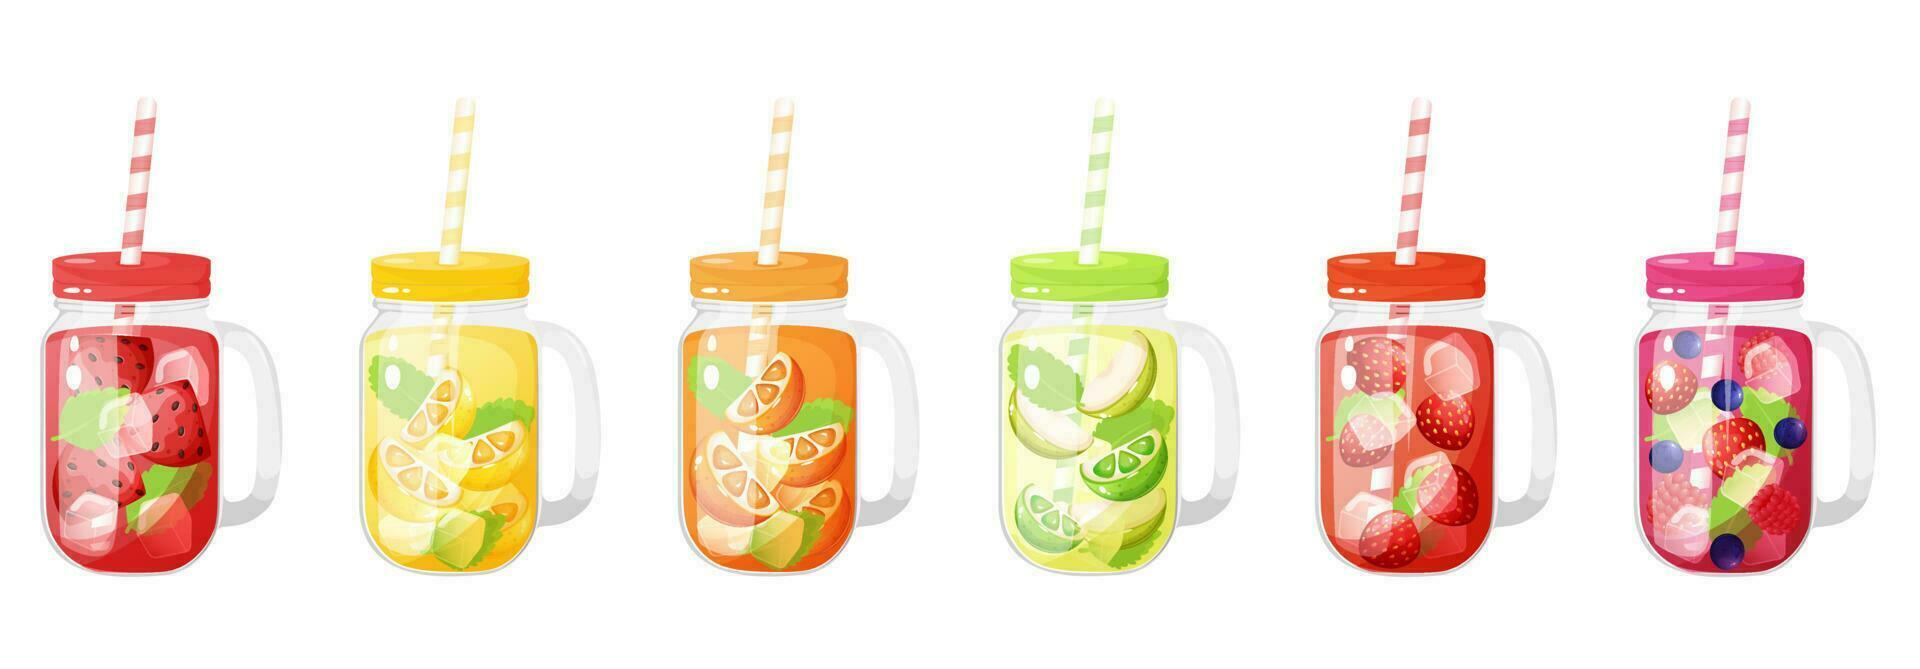 Different fruits and berries cold drinks in a glass jar with cap and straw. Soft drinks vector illustration.